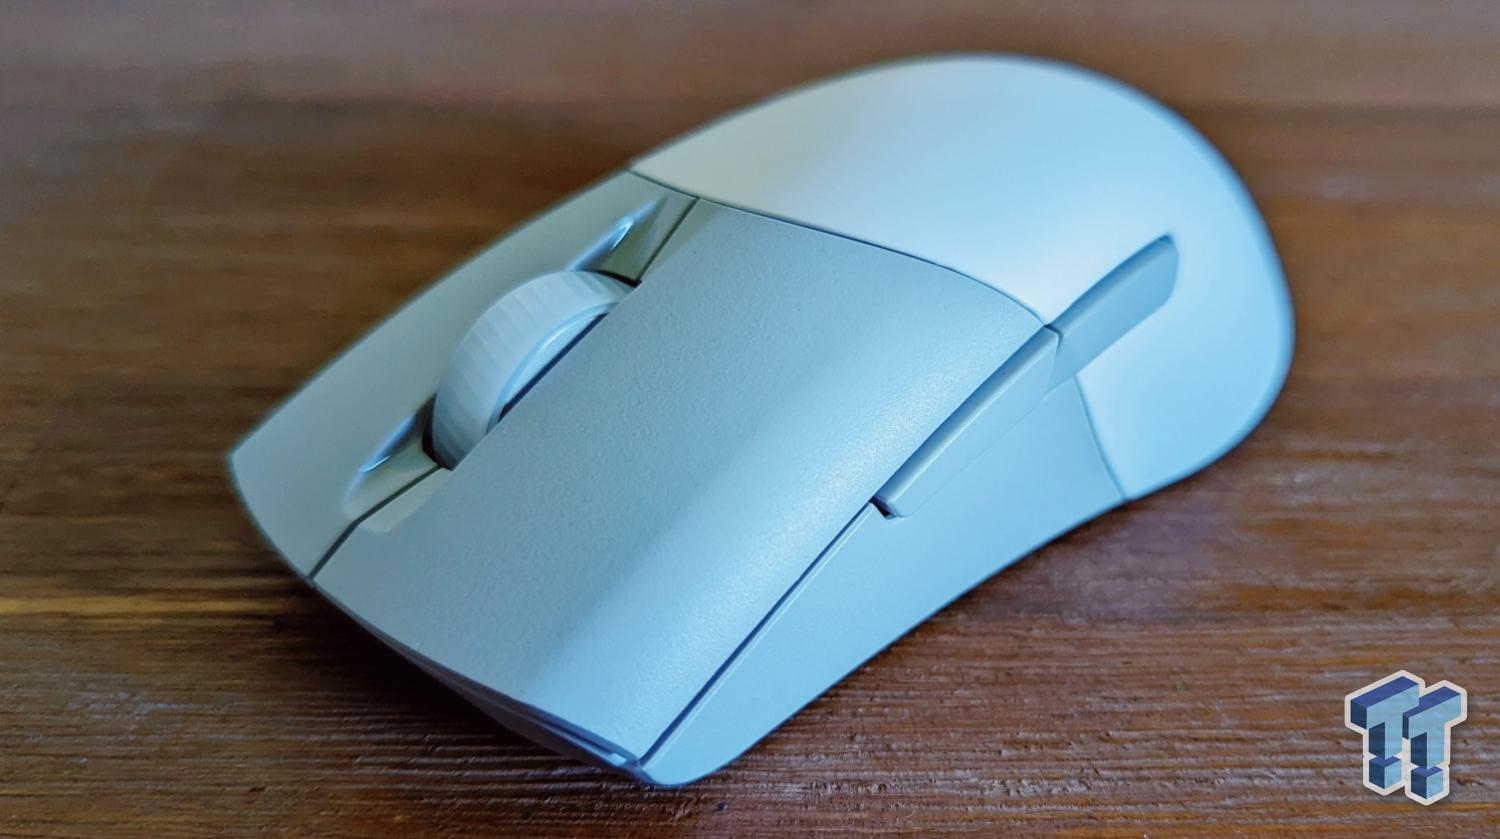 Paracorded Deathadder V2 Mini - Small hand endgame : r/MouseReview